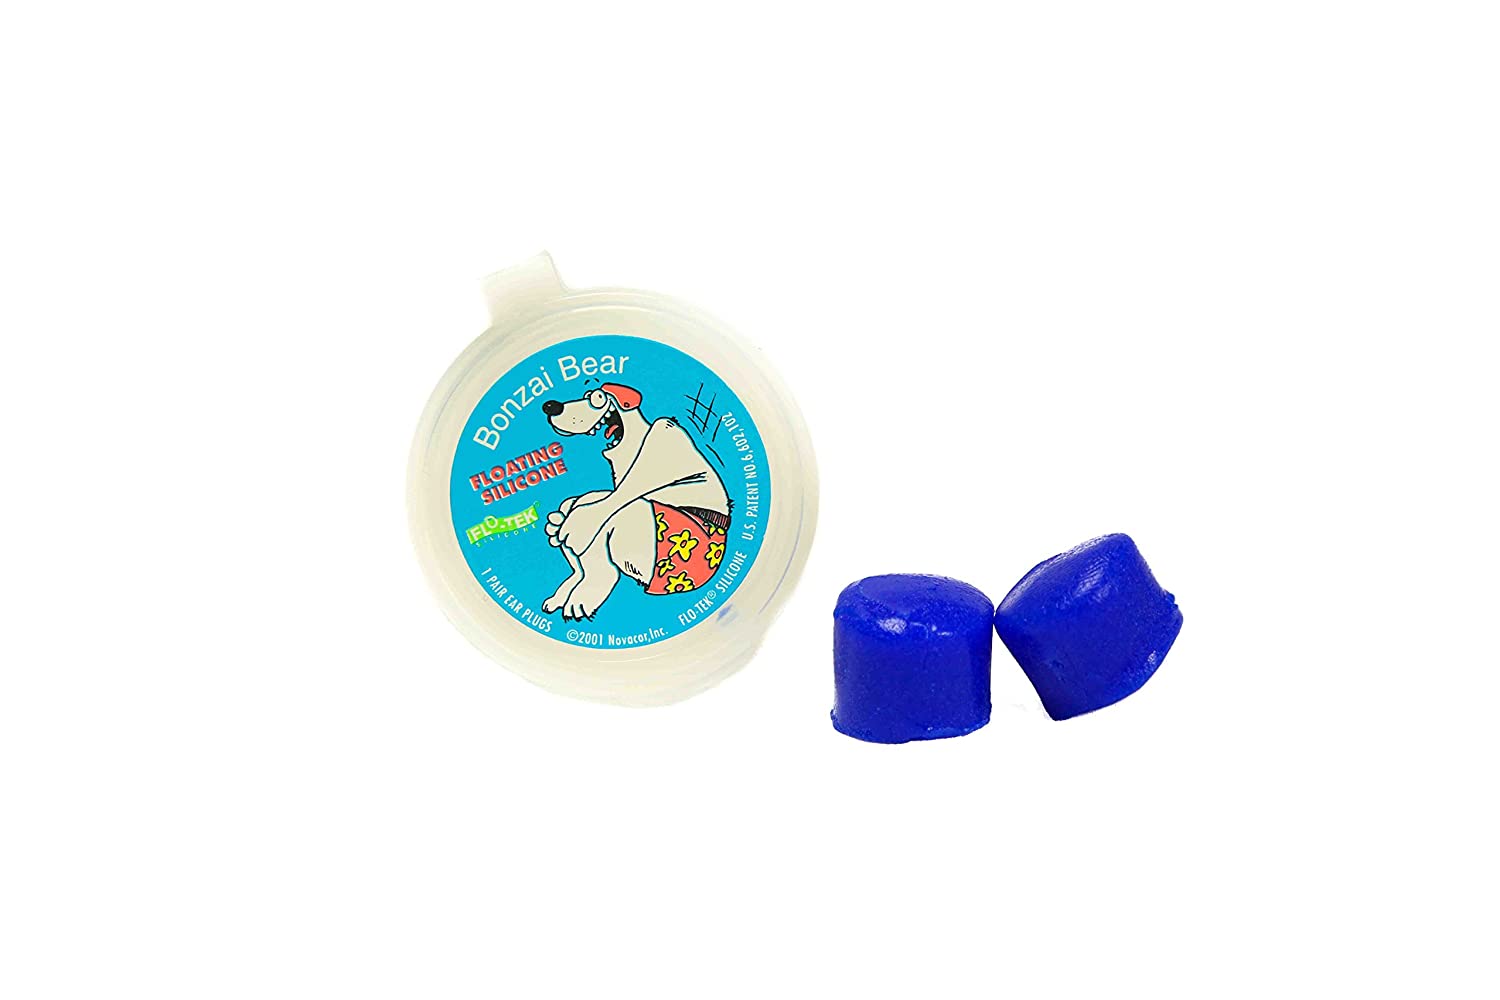 Putty Buddies Floating Earplugs 10-Pair Pack - Soft Silicone Ear Plugs for Swimming & Bathing